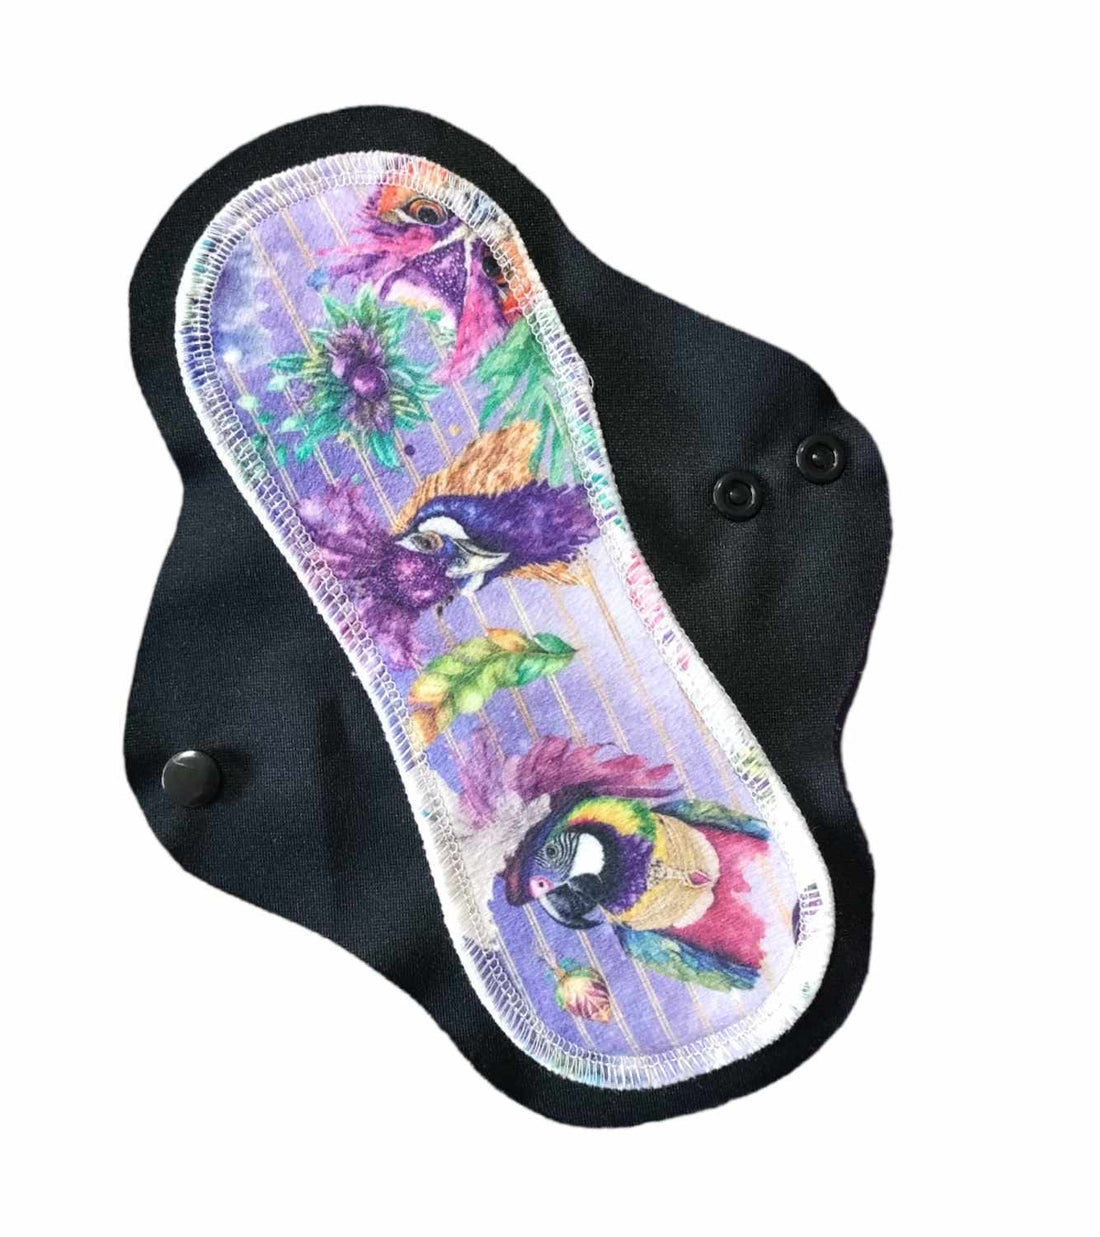 You Can’t Mask This Heavy Cloth Pad